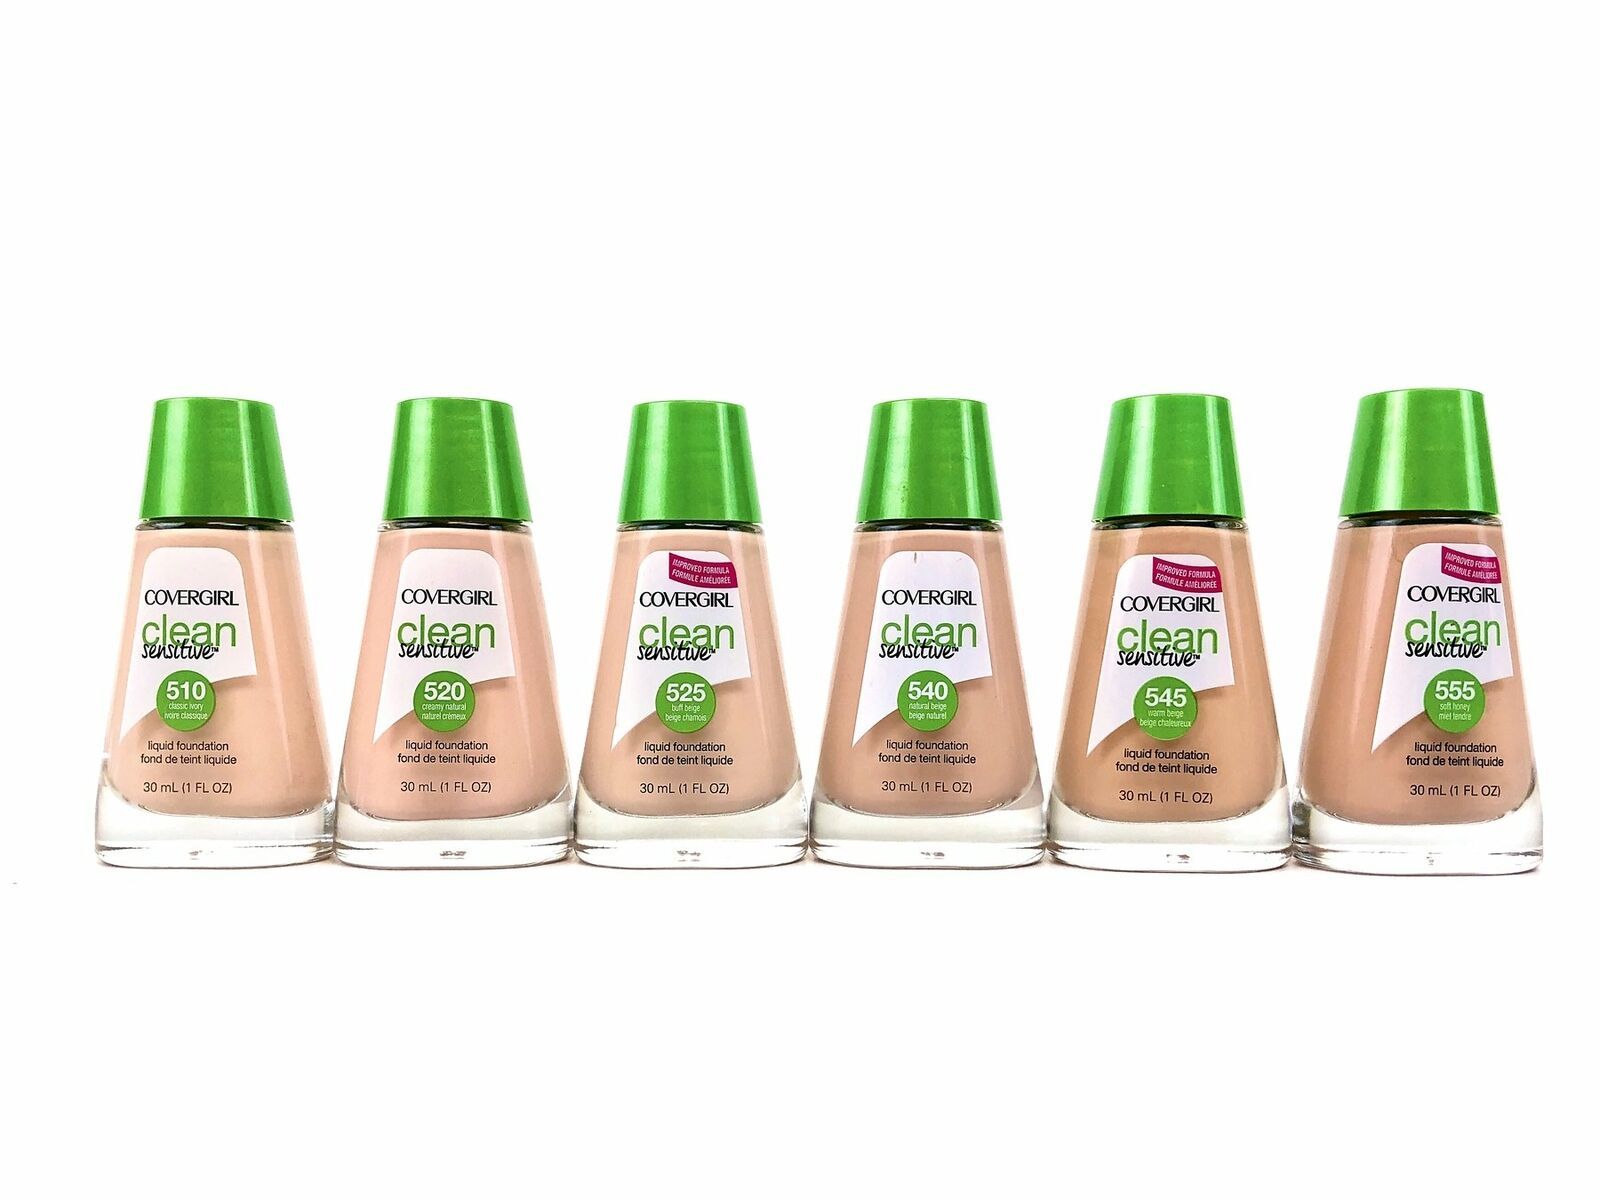 Primary image for BUY 1 GET 1 AT 20% OFF (Add 2) Covergirl Clean Sensitive Skin Liquid Foundation